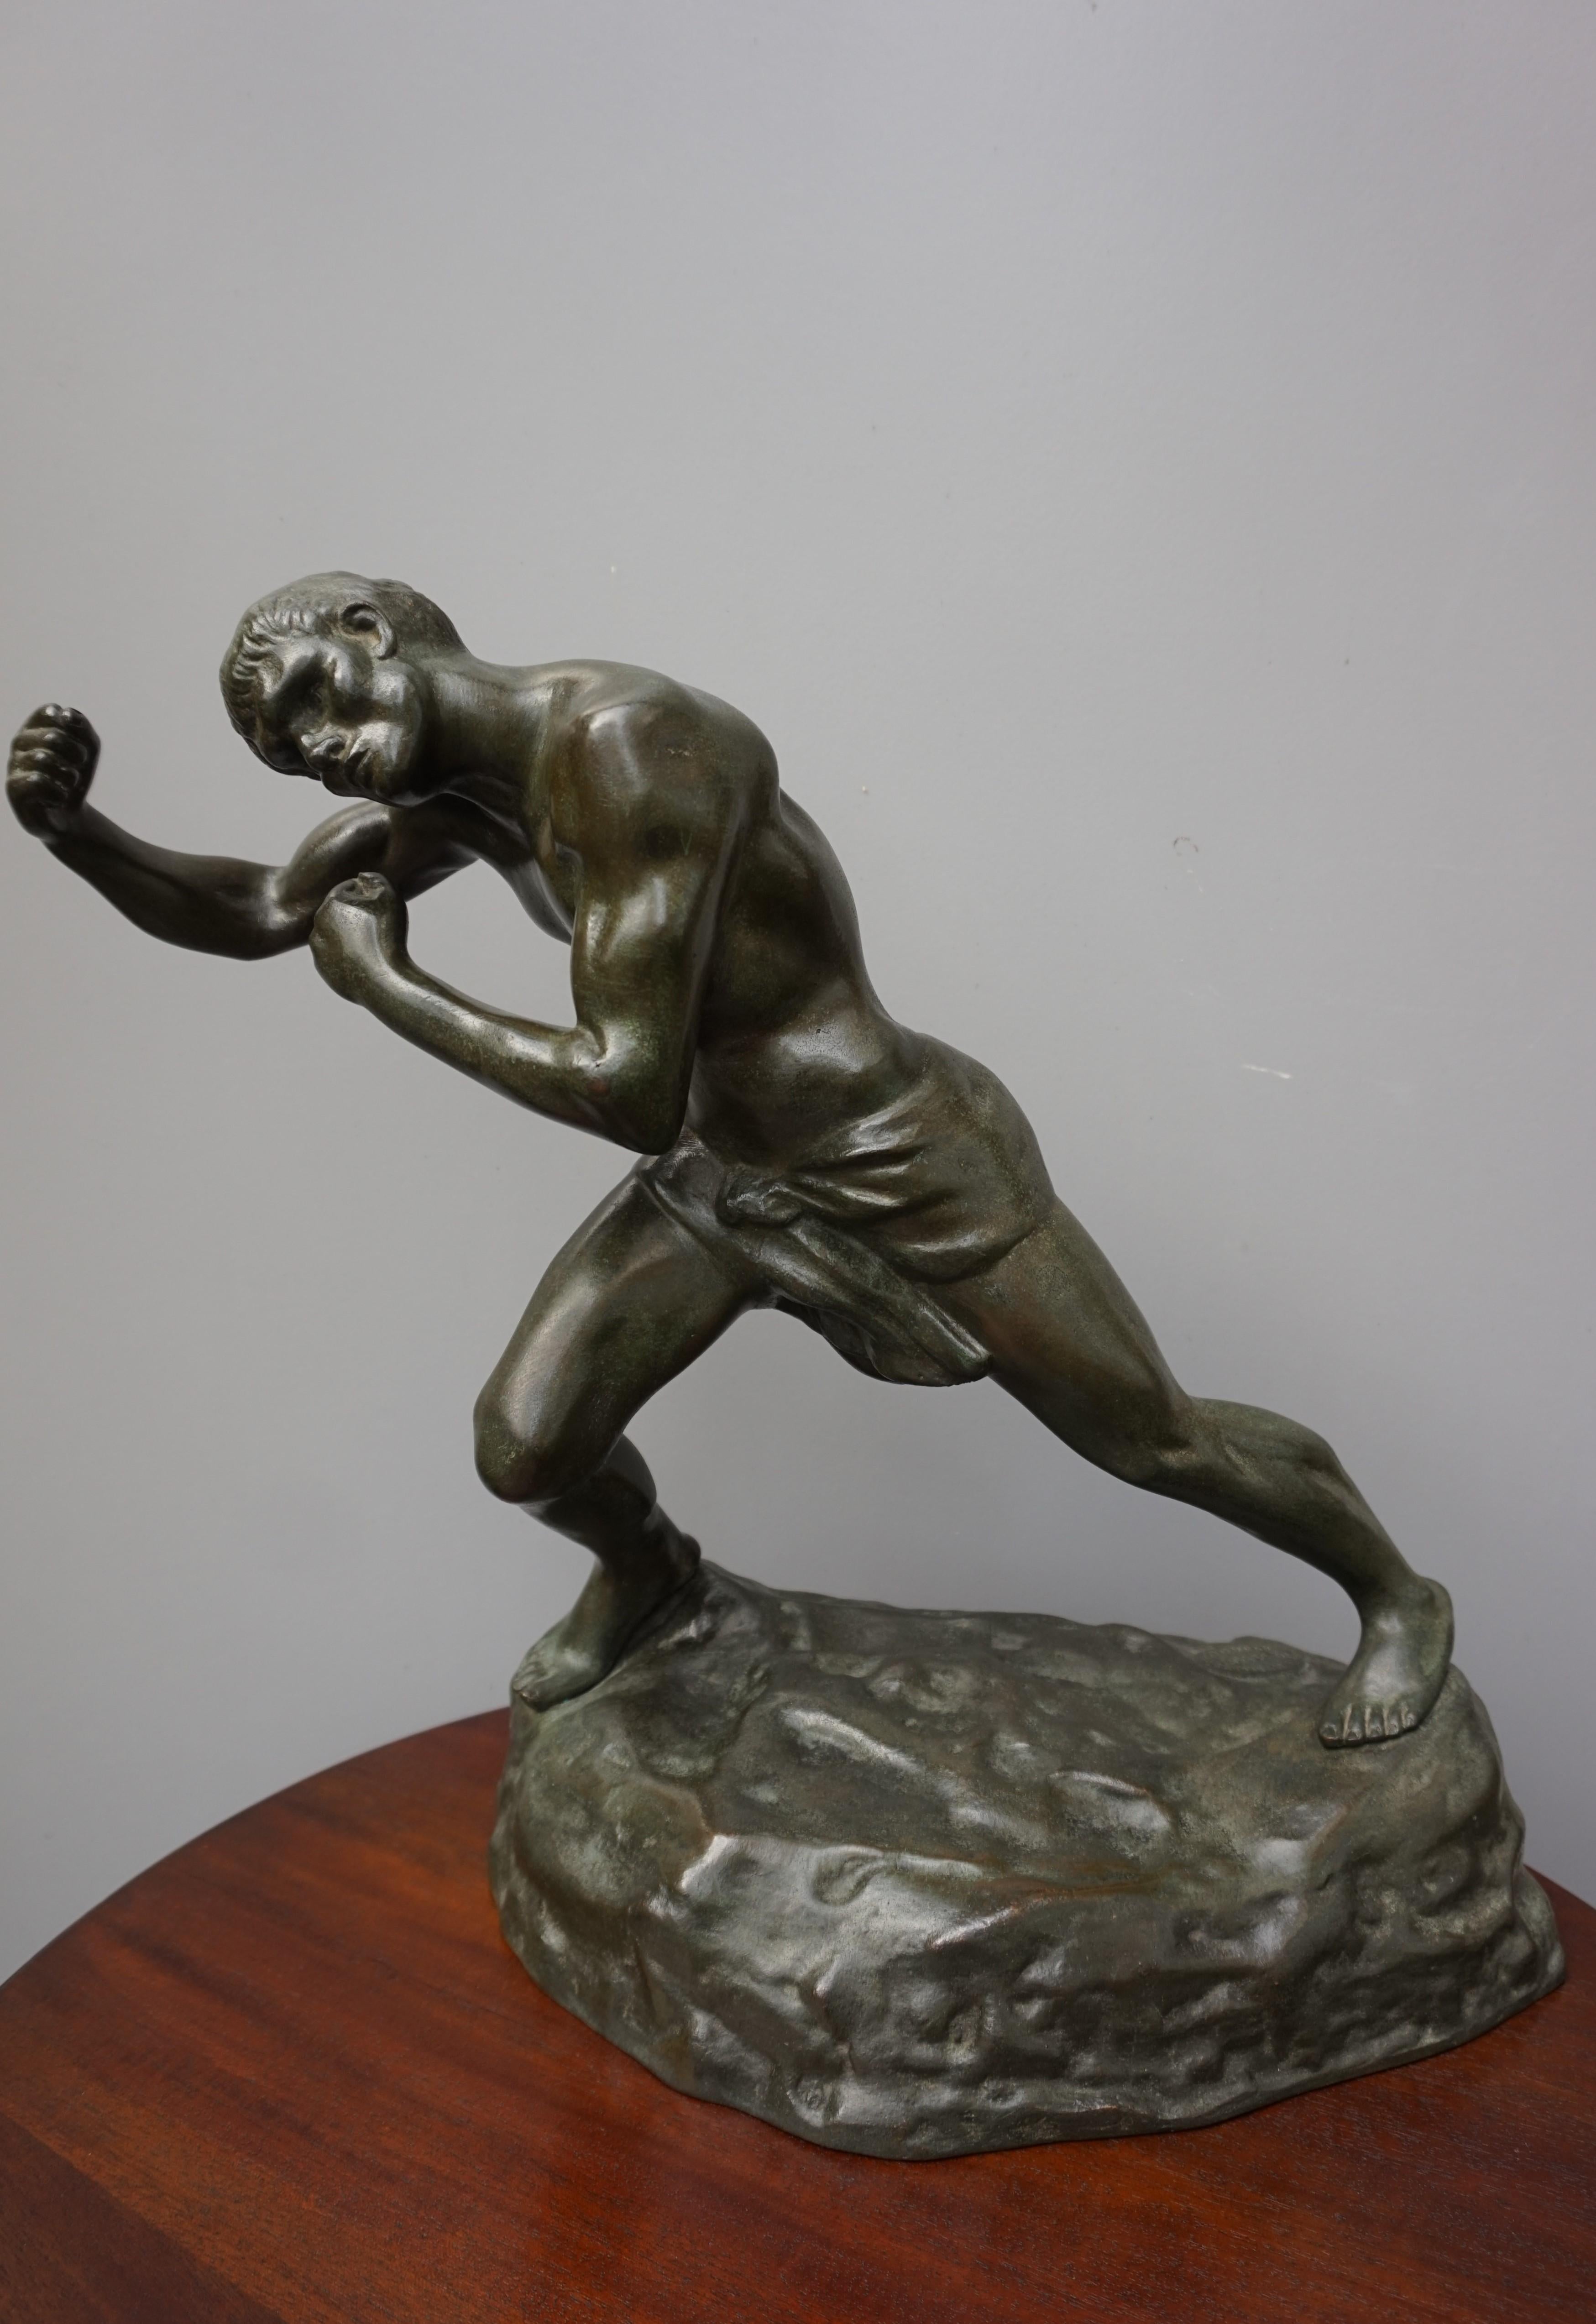 Powerful bronze sculpture of an athletic and ripped fighter.

This sizable and heavy work of art is as beautiful as the day it was handcrafted. Belgian sculptor Jef Lambeaux (1852-1908) had a penchant for capturing the human physique in motion, with